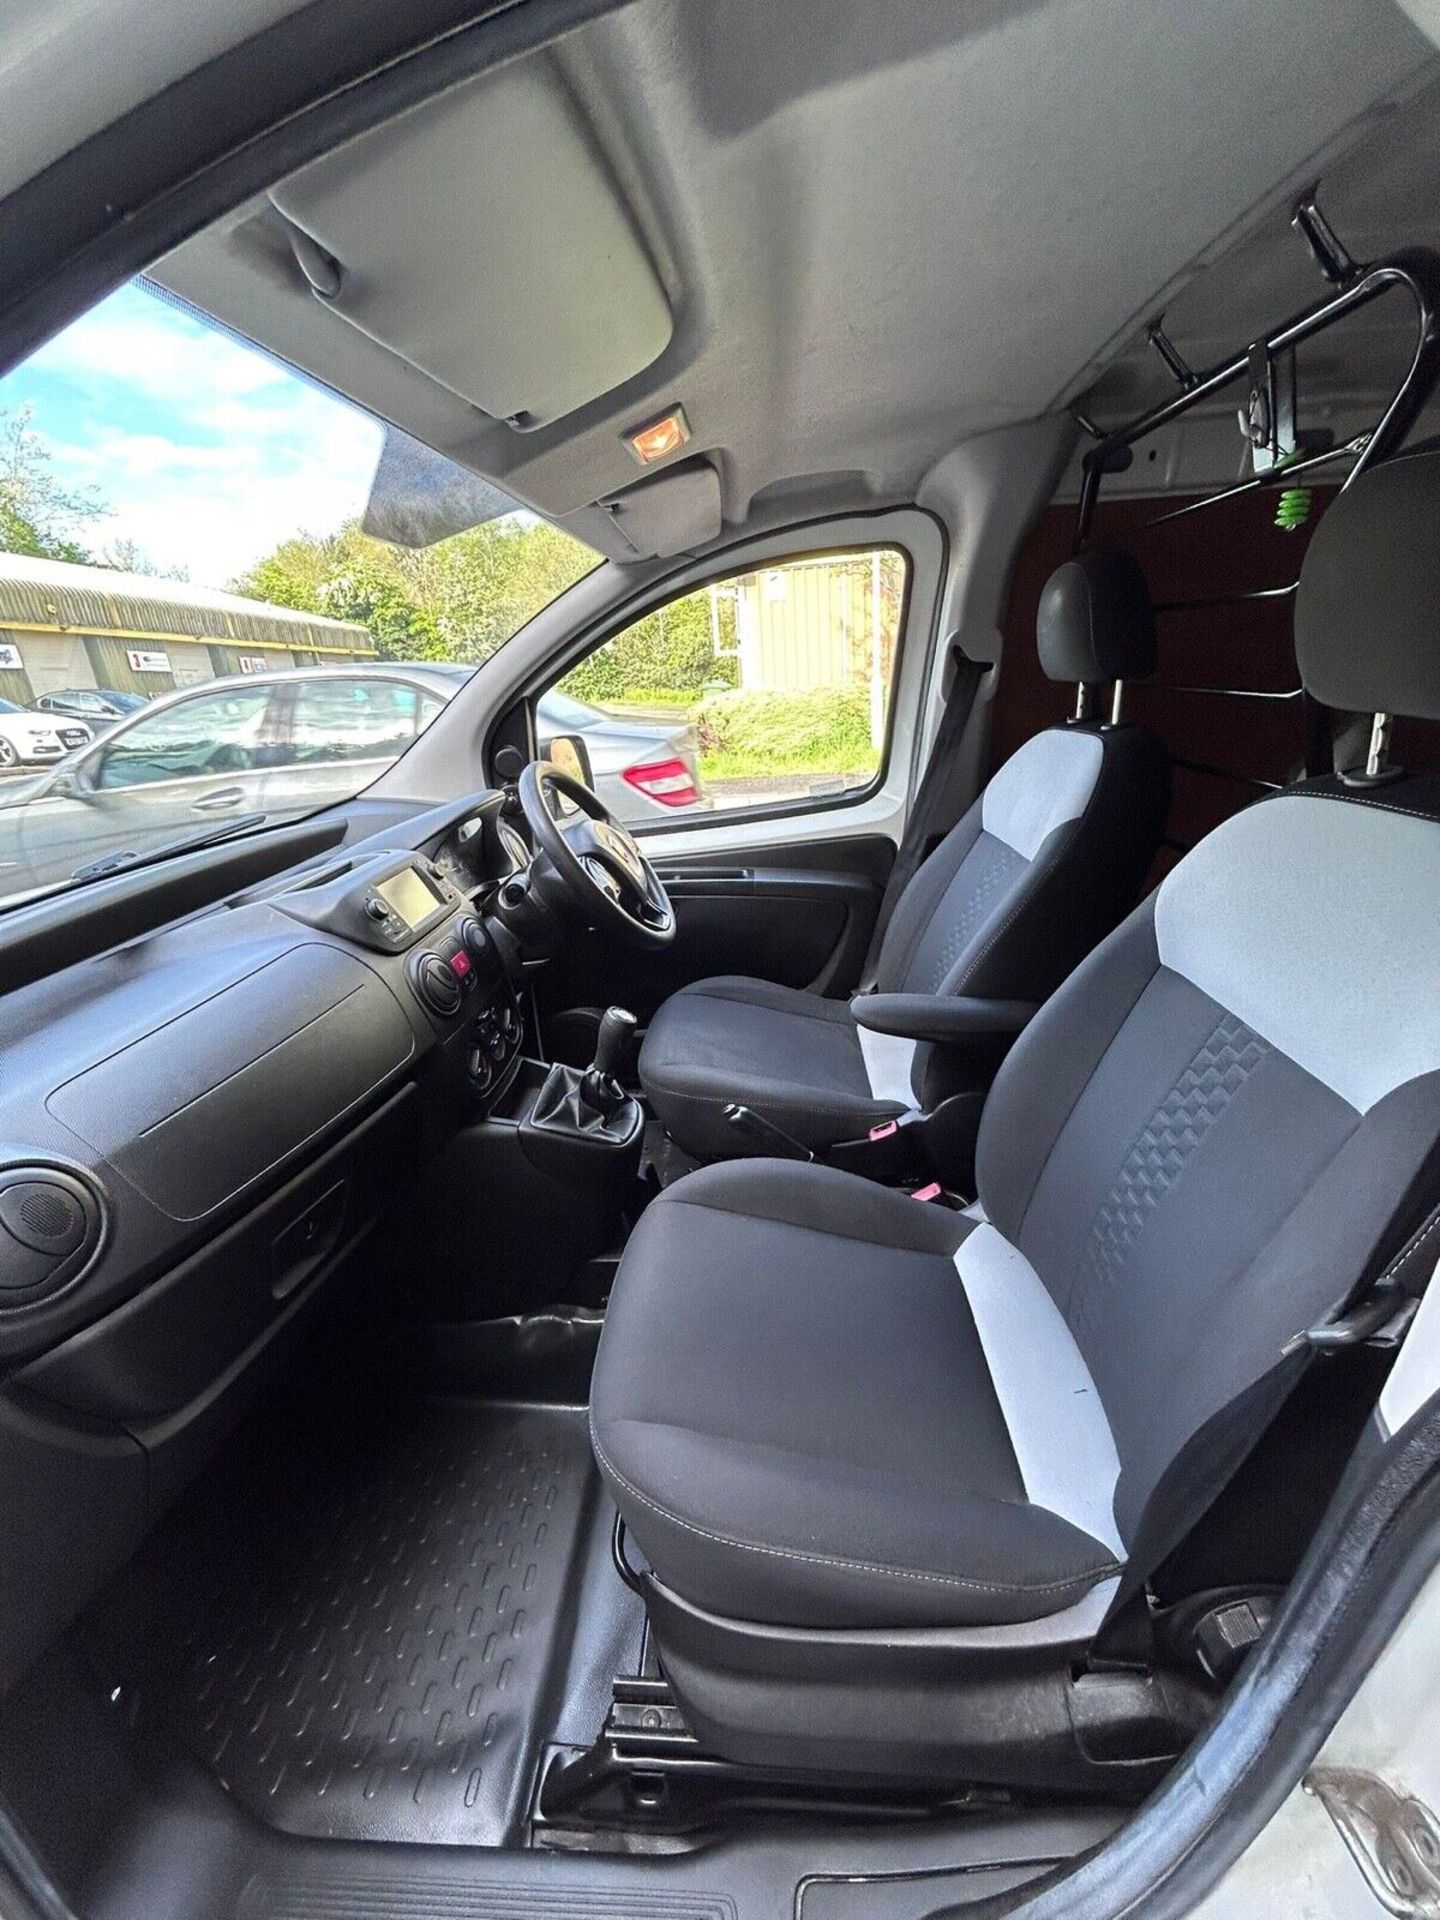 2018 FIAT FIORINO VAN - WELL-MAINTAINED, MOT UNTIL 04/2025, FULL SERVICE HISTORY - Image 5 of 6